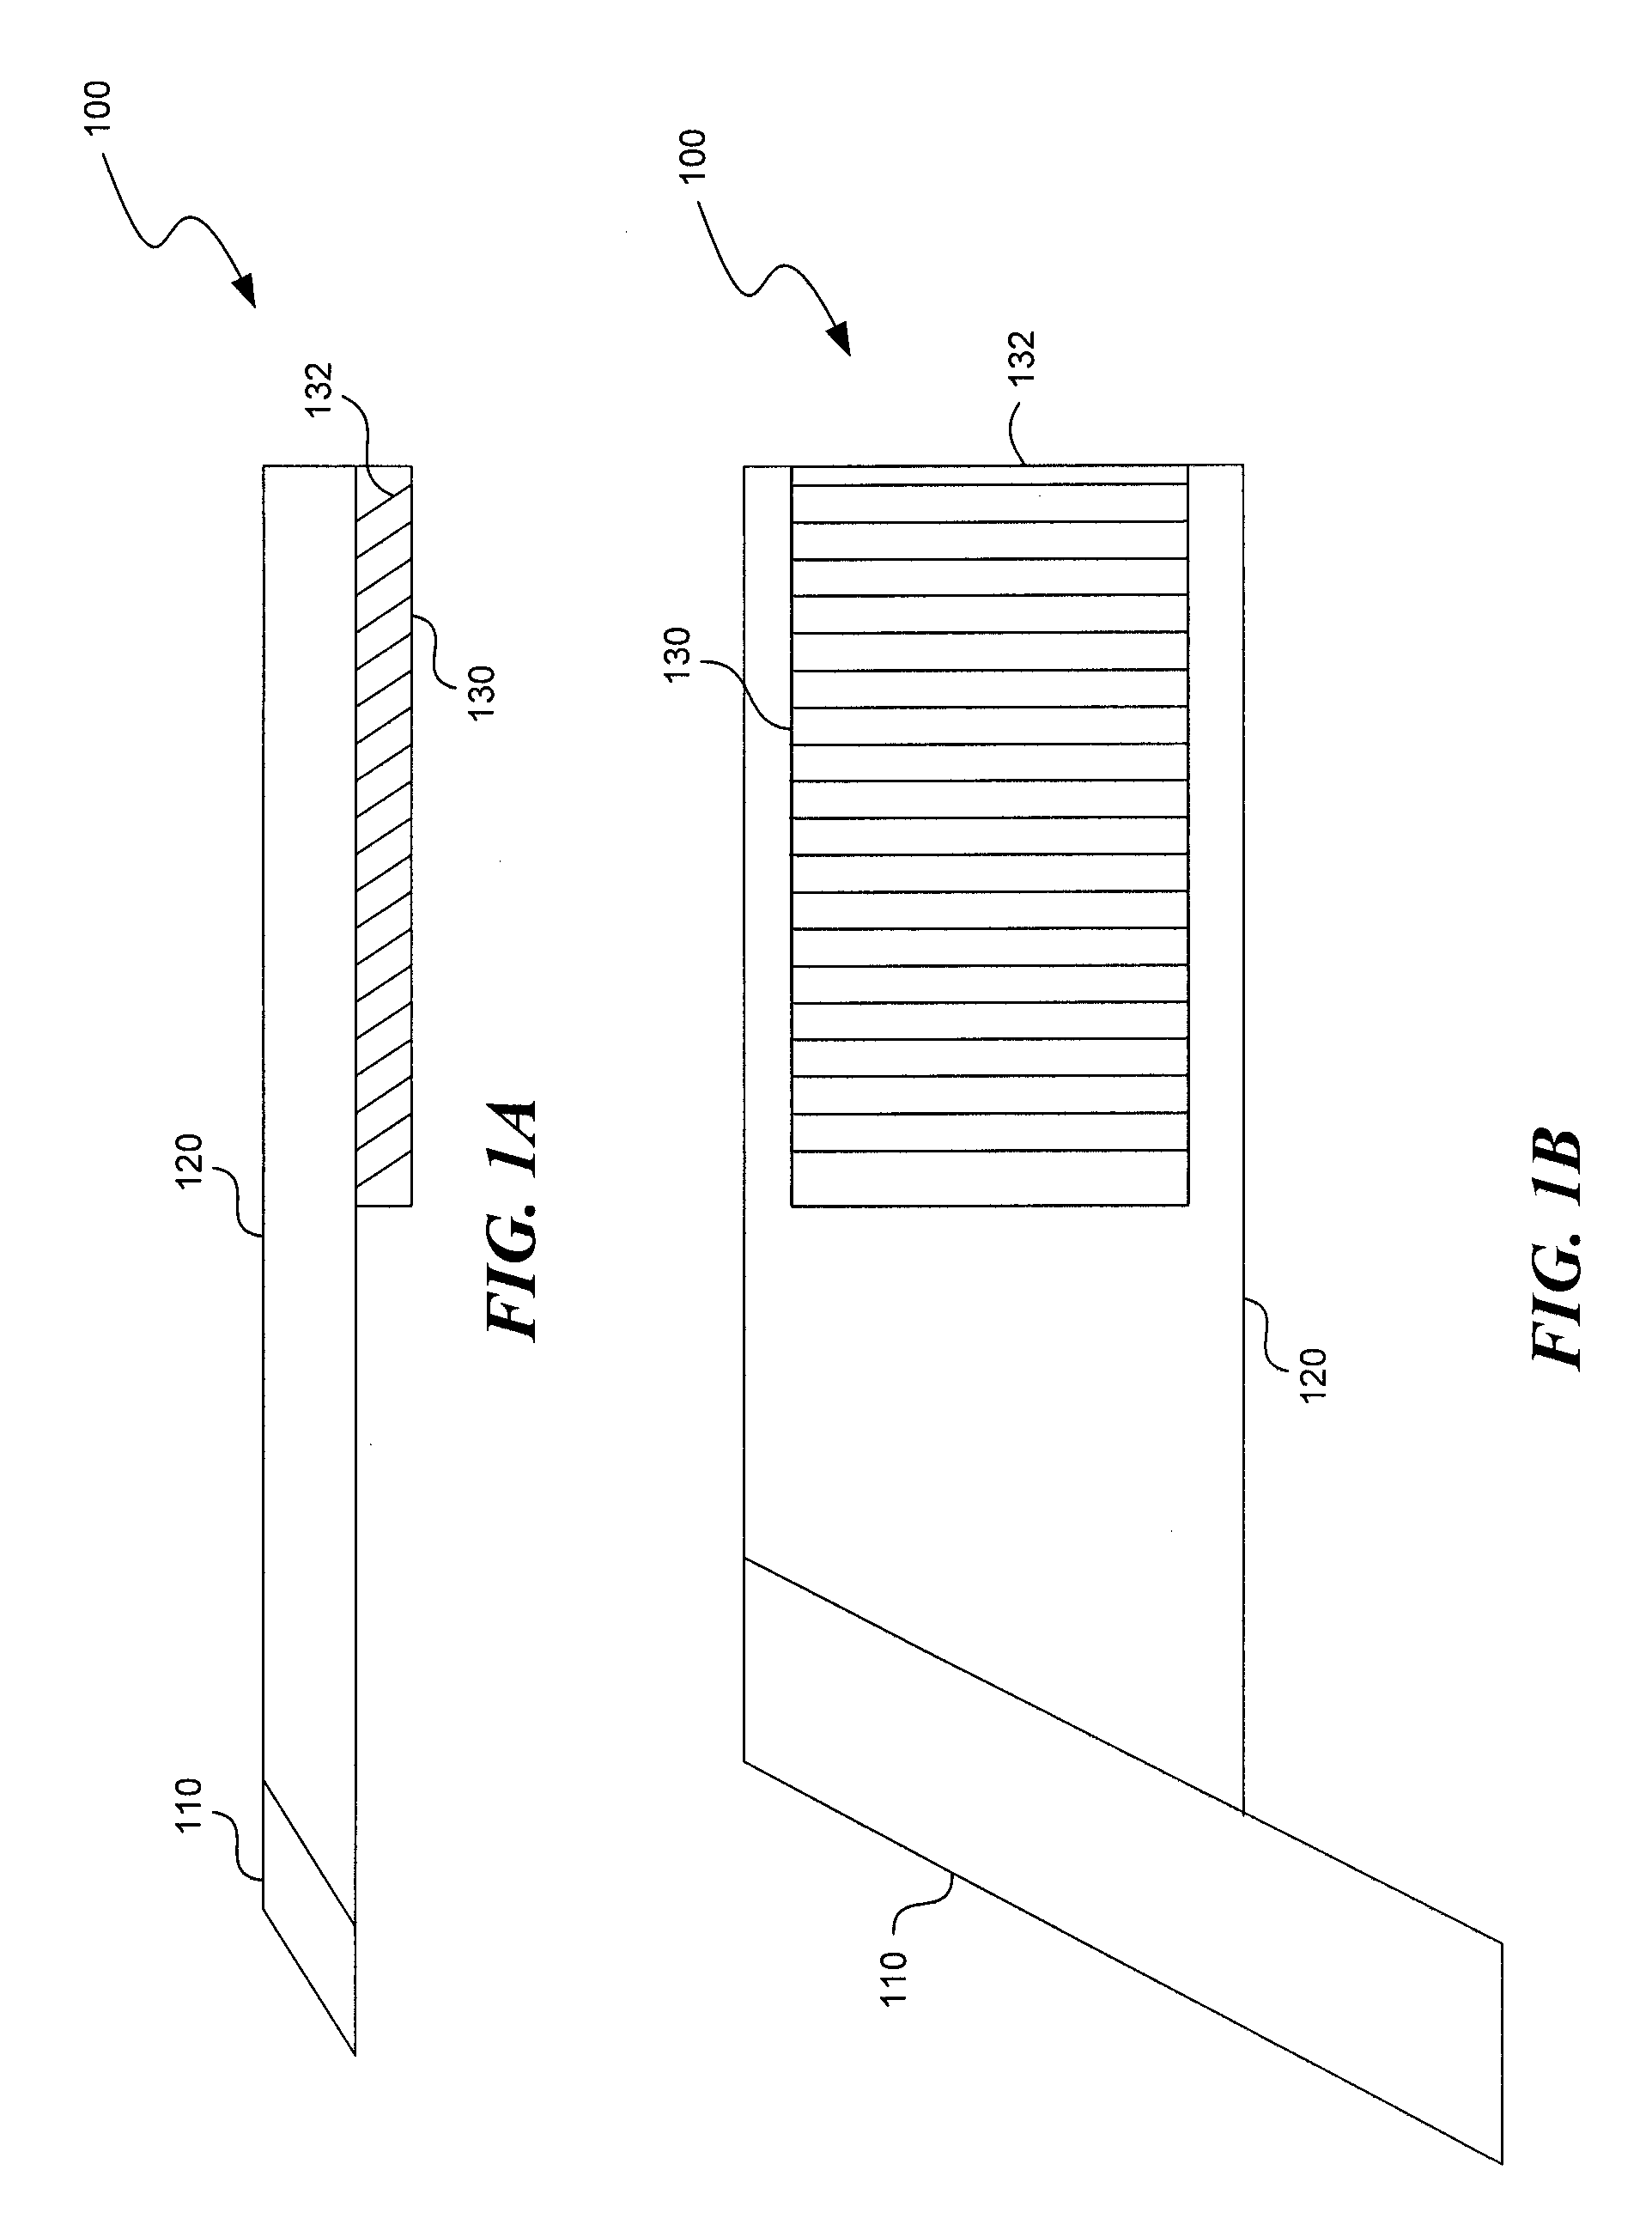 Substrate-guided relays for use with scanned beam light sources